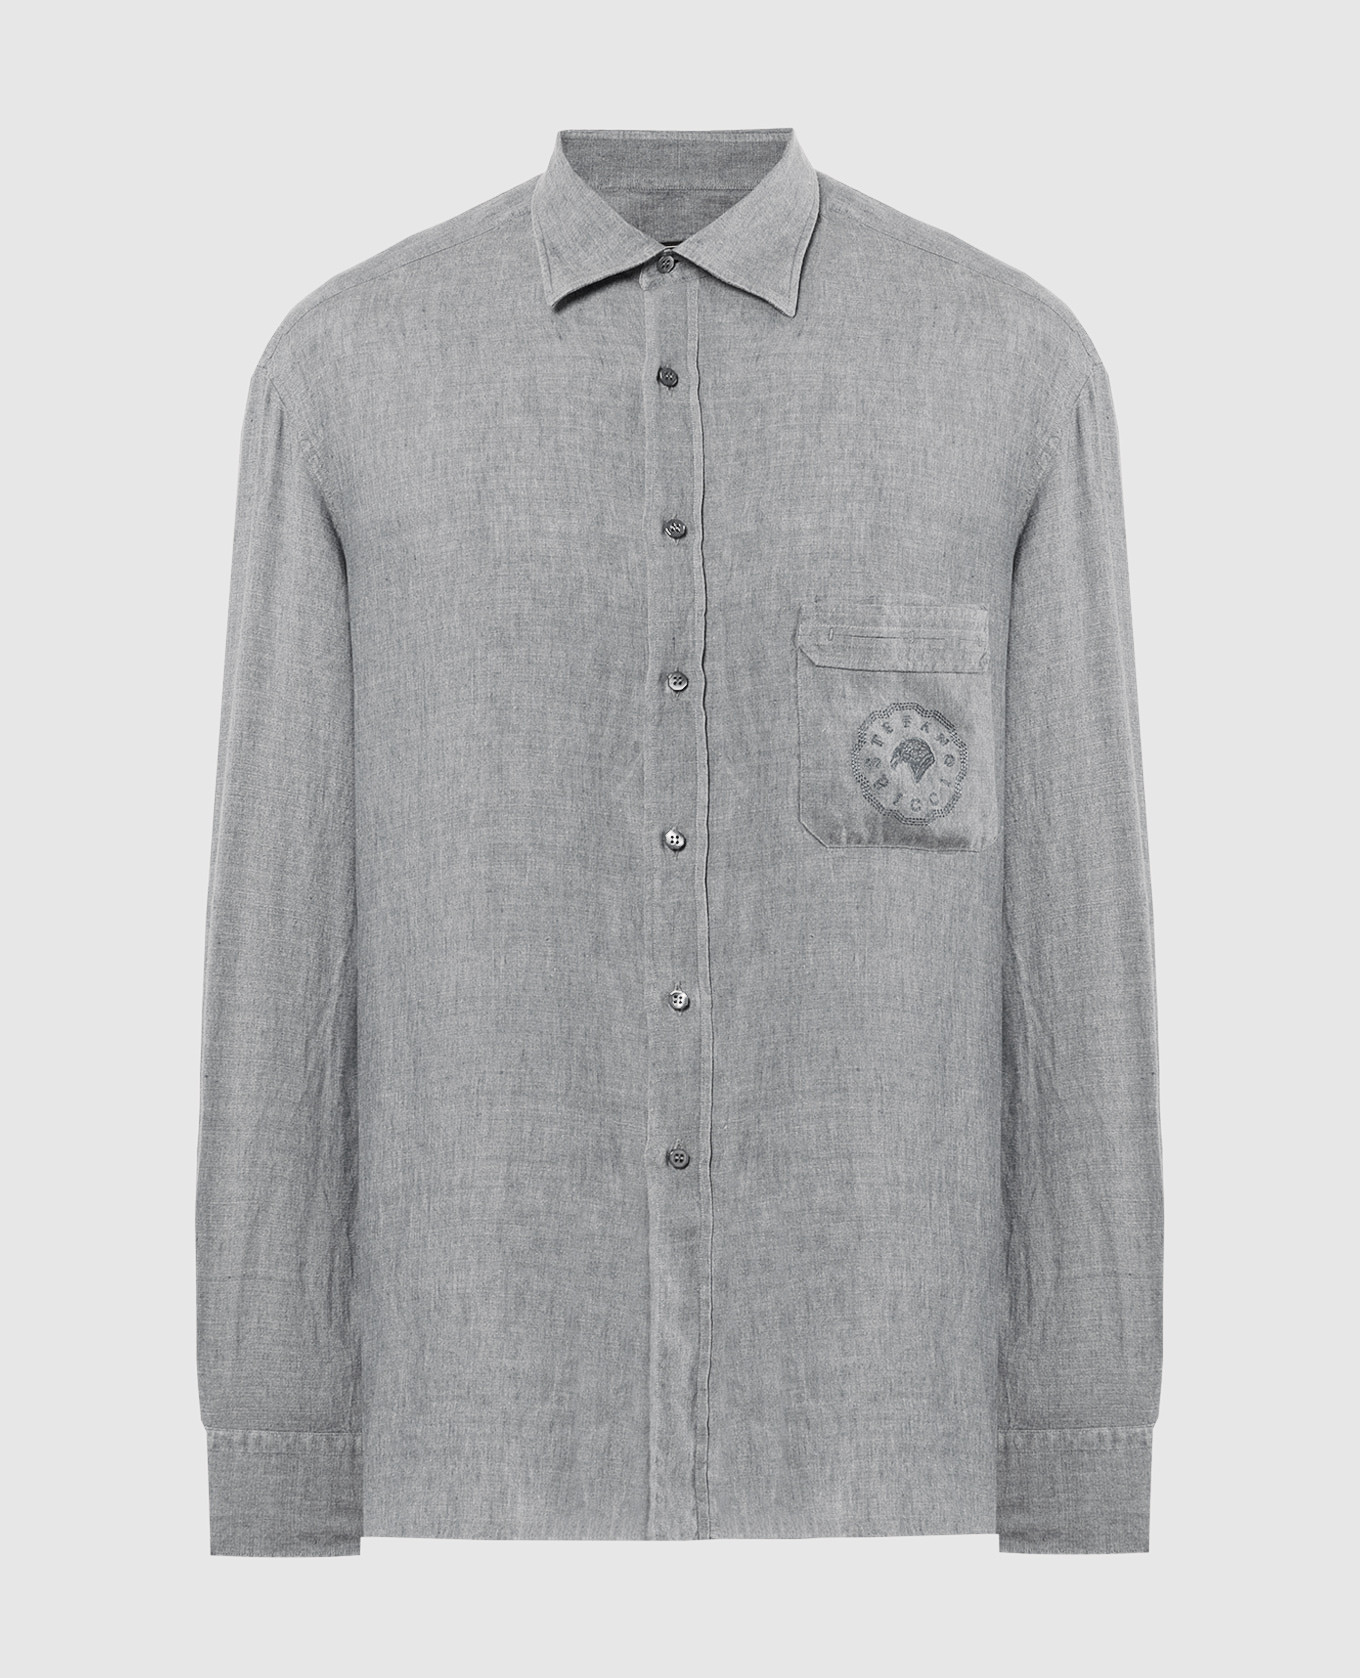 Gray linen shirt with logo embroidery